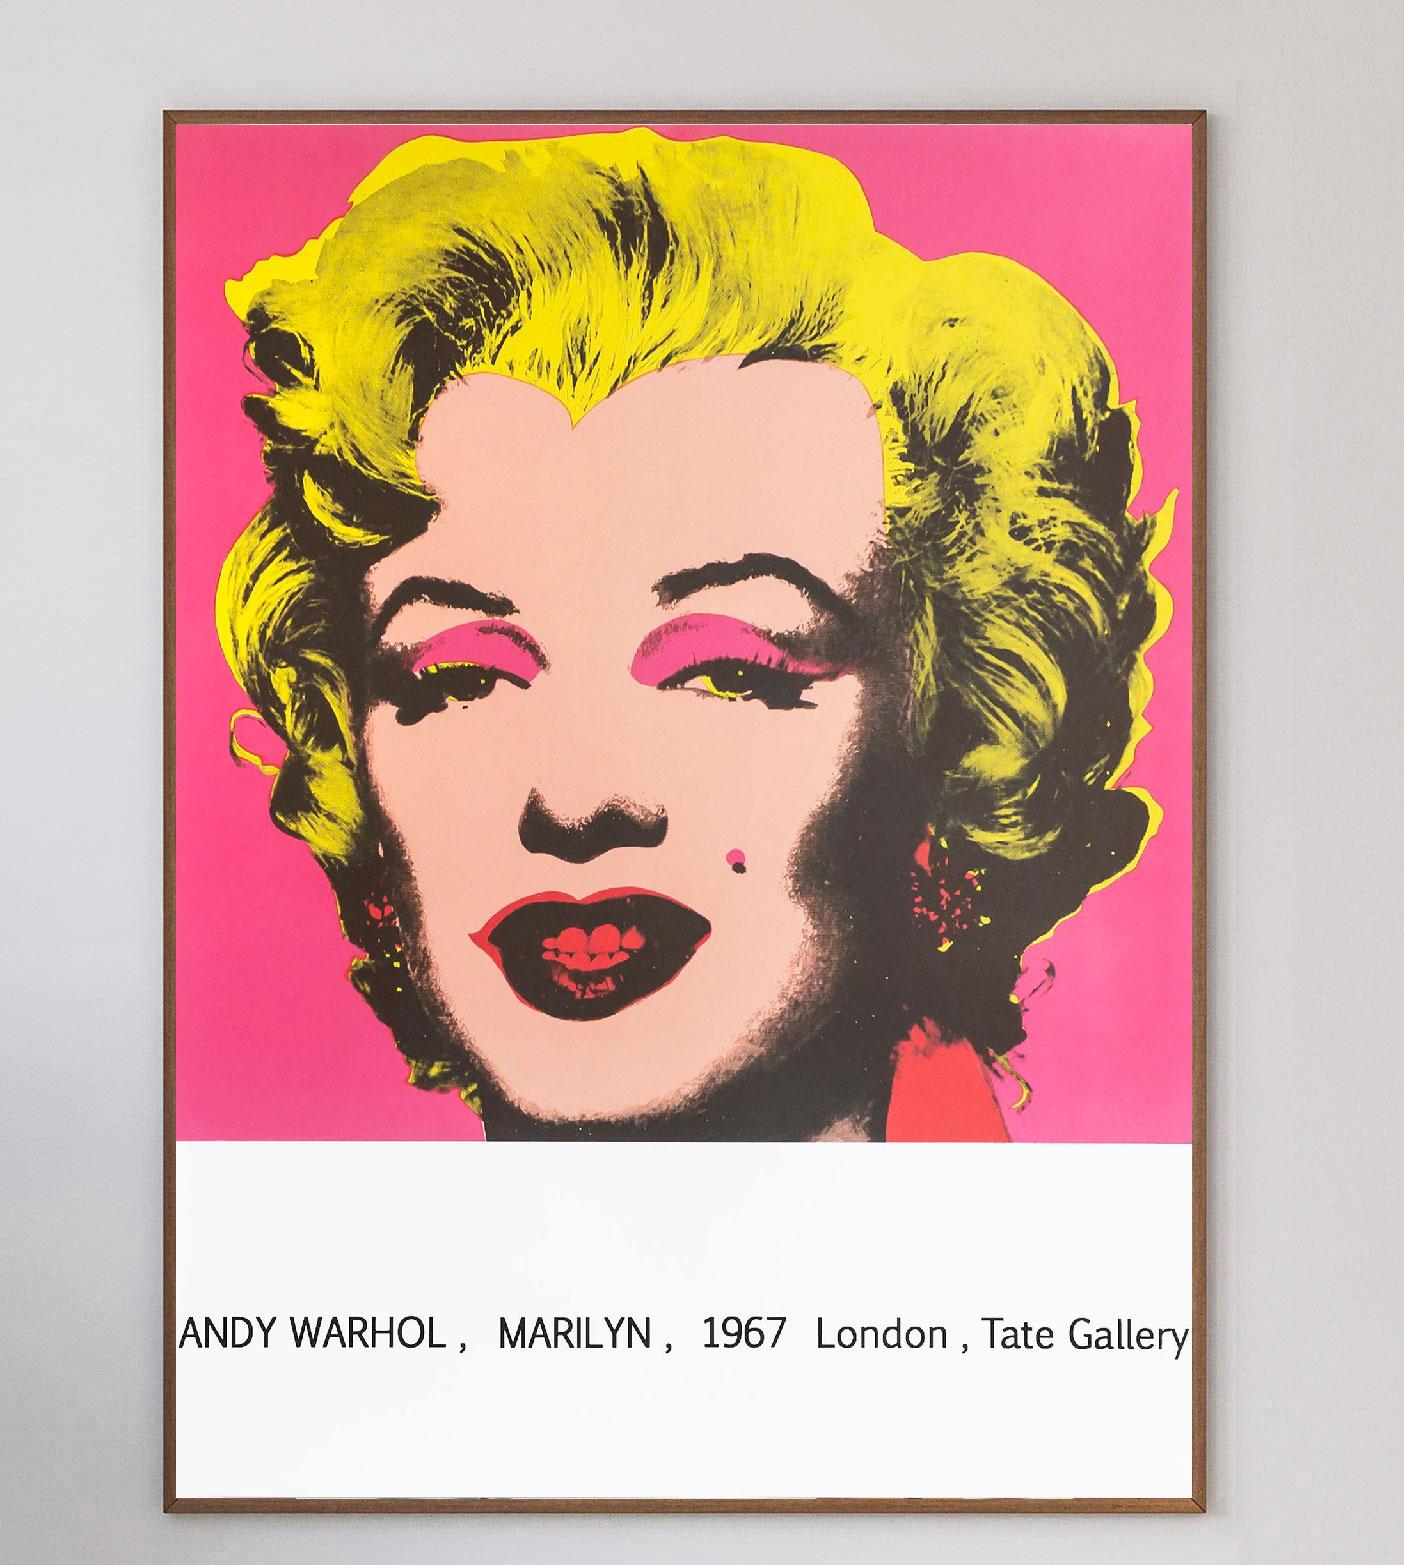 Original limited lithographic poster from the 1967 Andy Warhol exhibition at the Tate Museum Gallery in London.

Featuring perhaps his most famous work of Marilyn Monroe, this stunning piece is on mid stock paper, and the colours are extremely